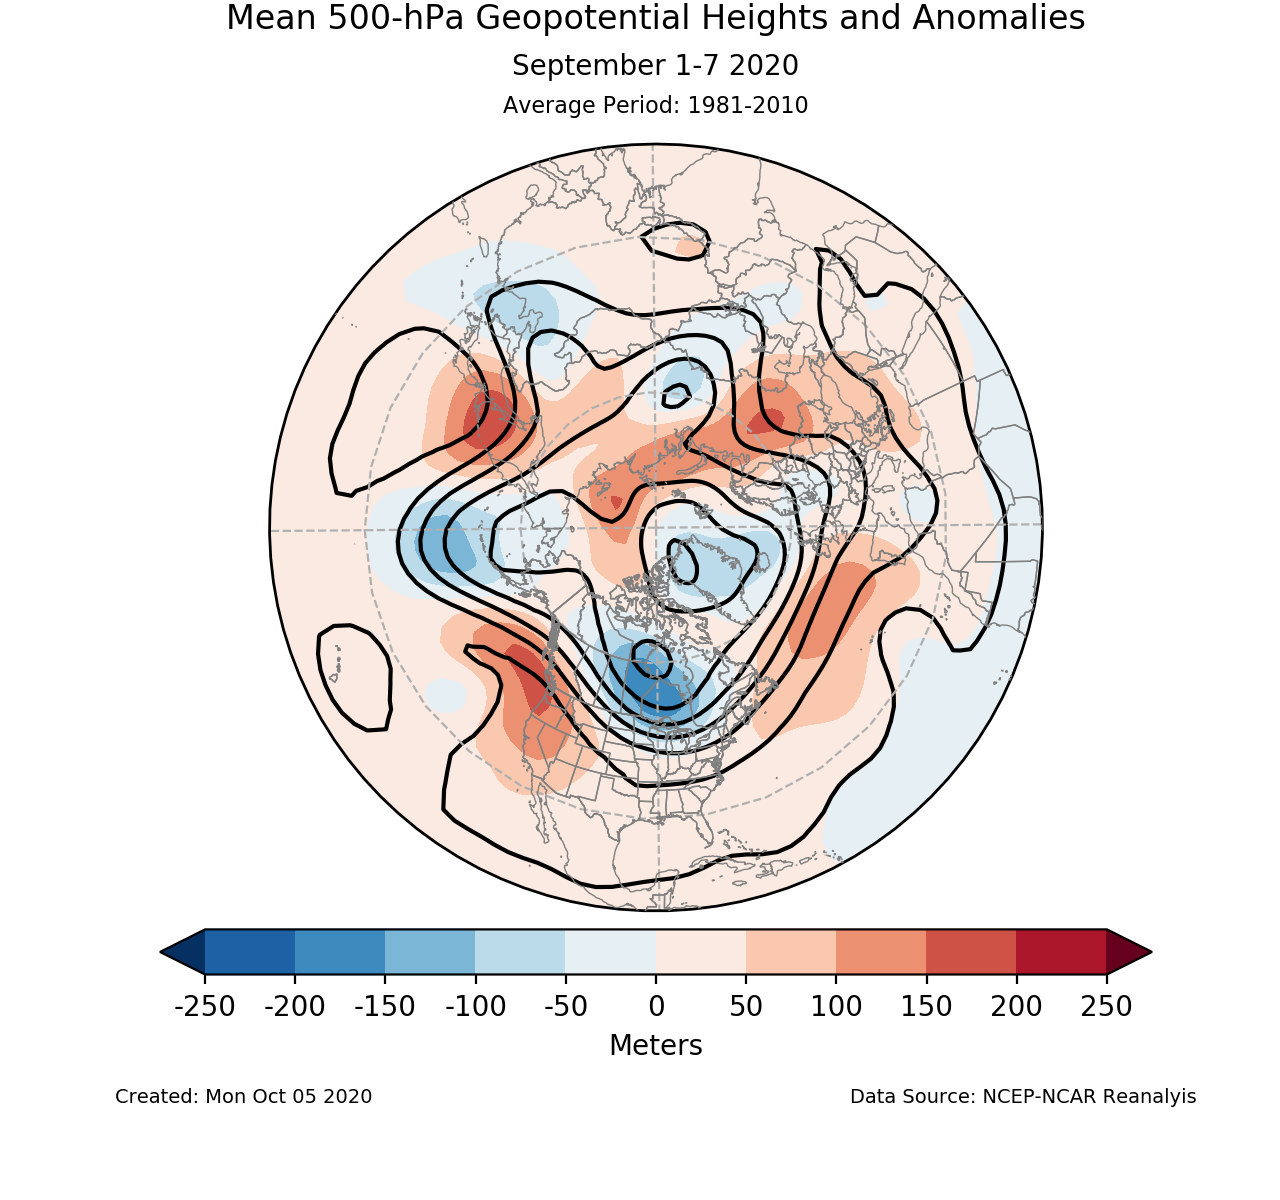 500-mb height mean (contours) and anomalies (shading) for the Northern Hemisphere for September 1-7 2020